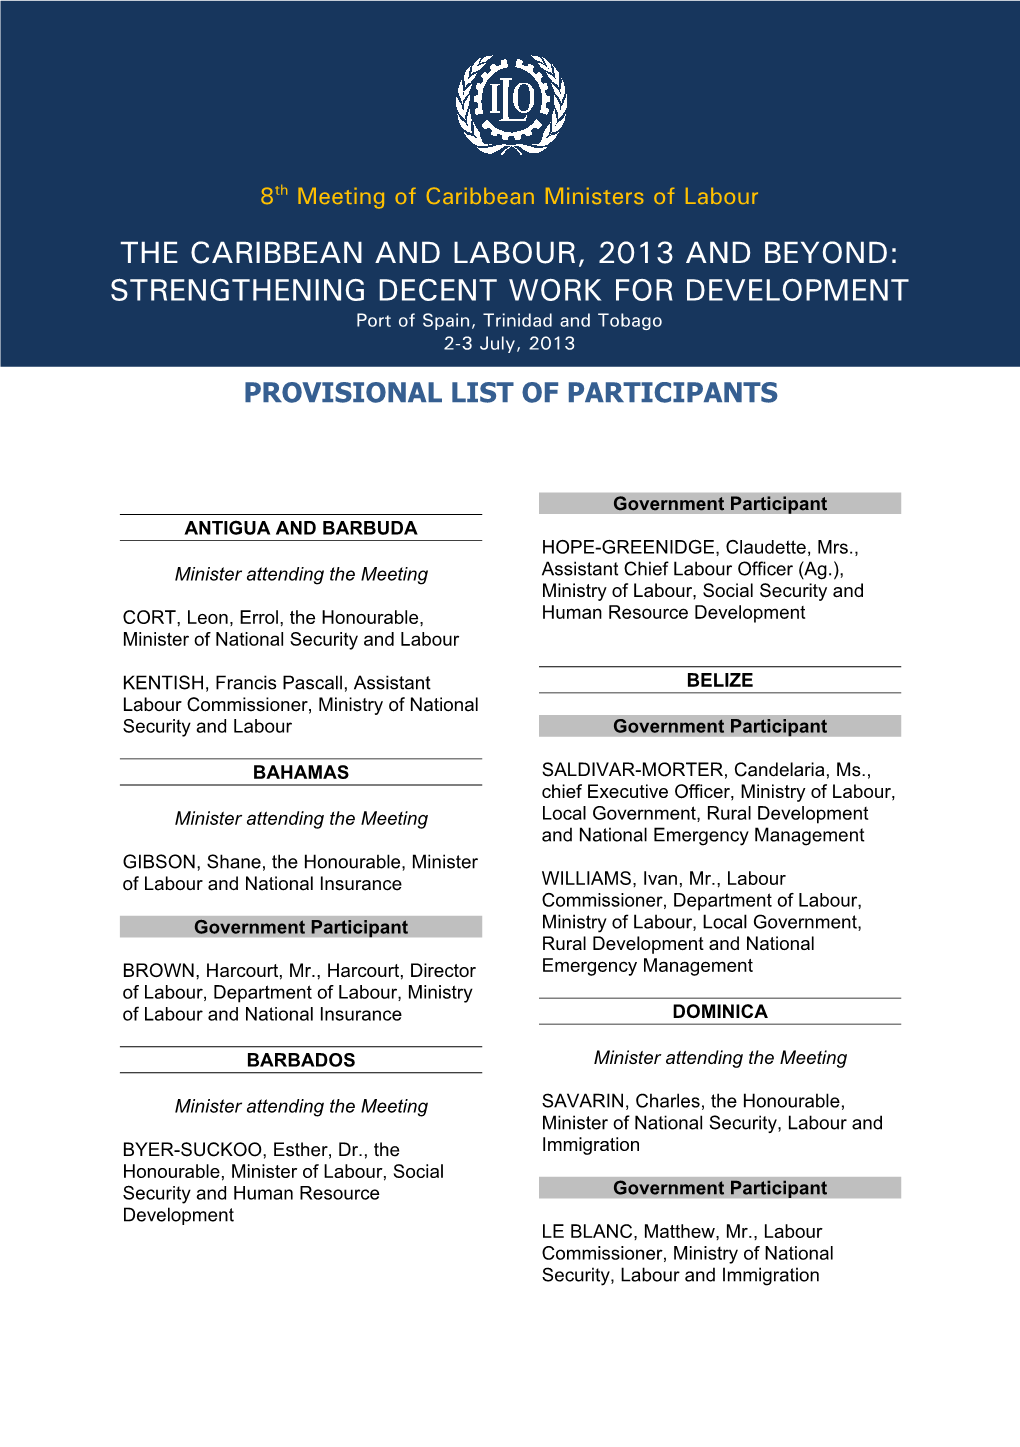 The Caribbean and Labour, 2013 and Beyond